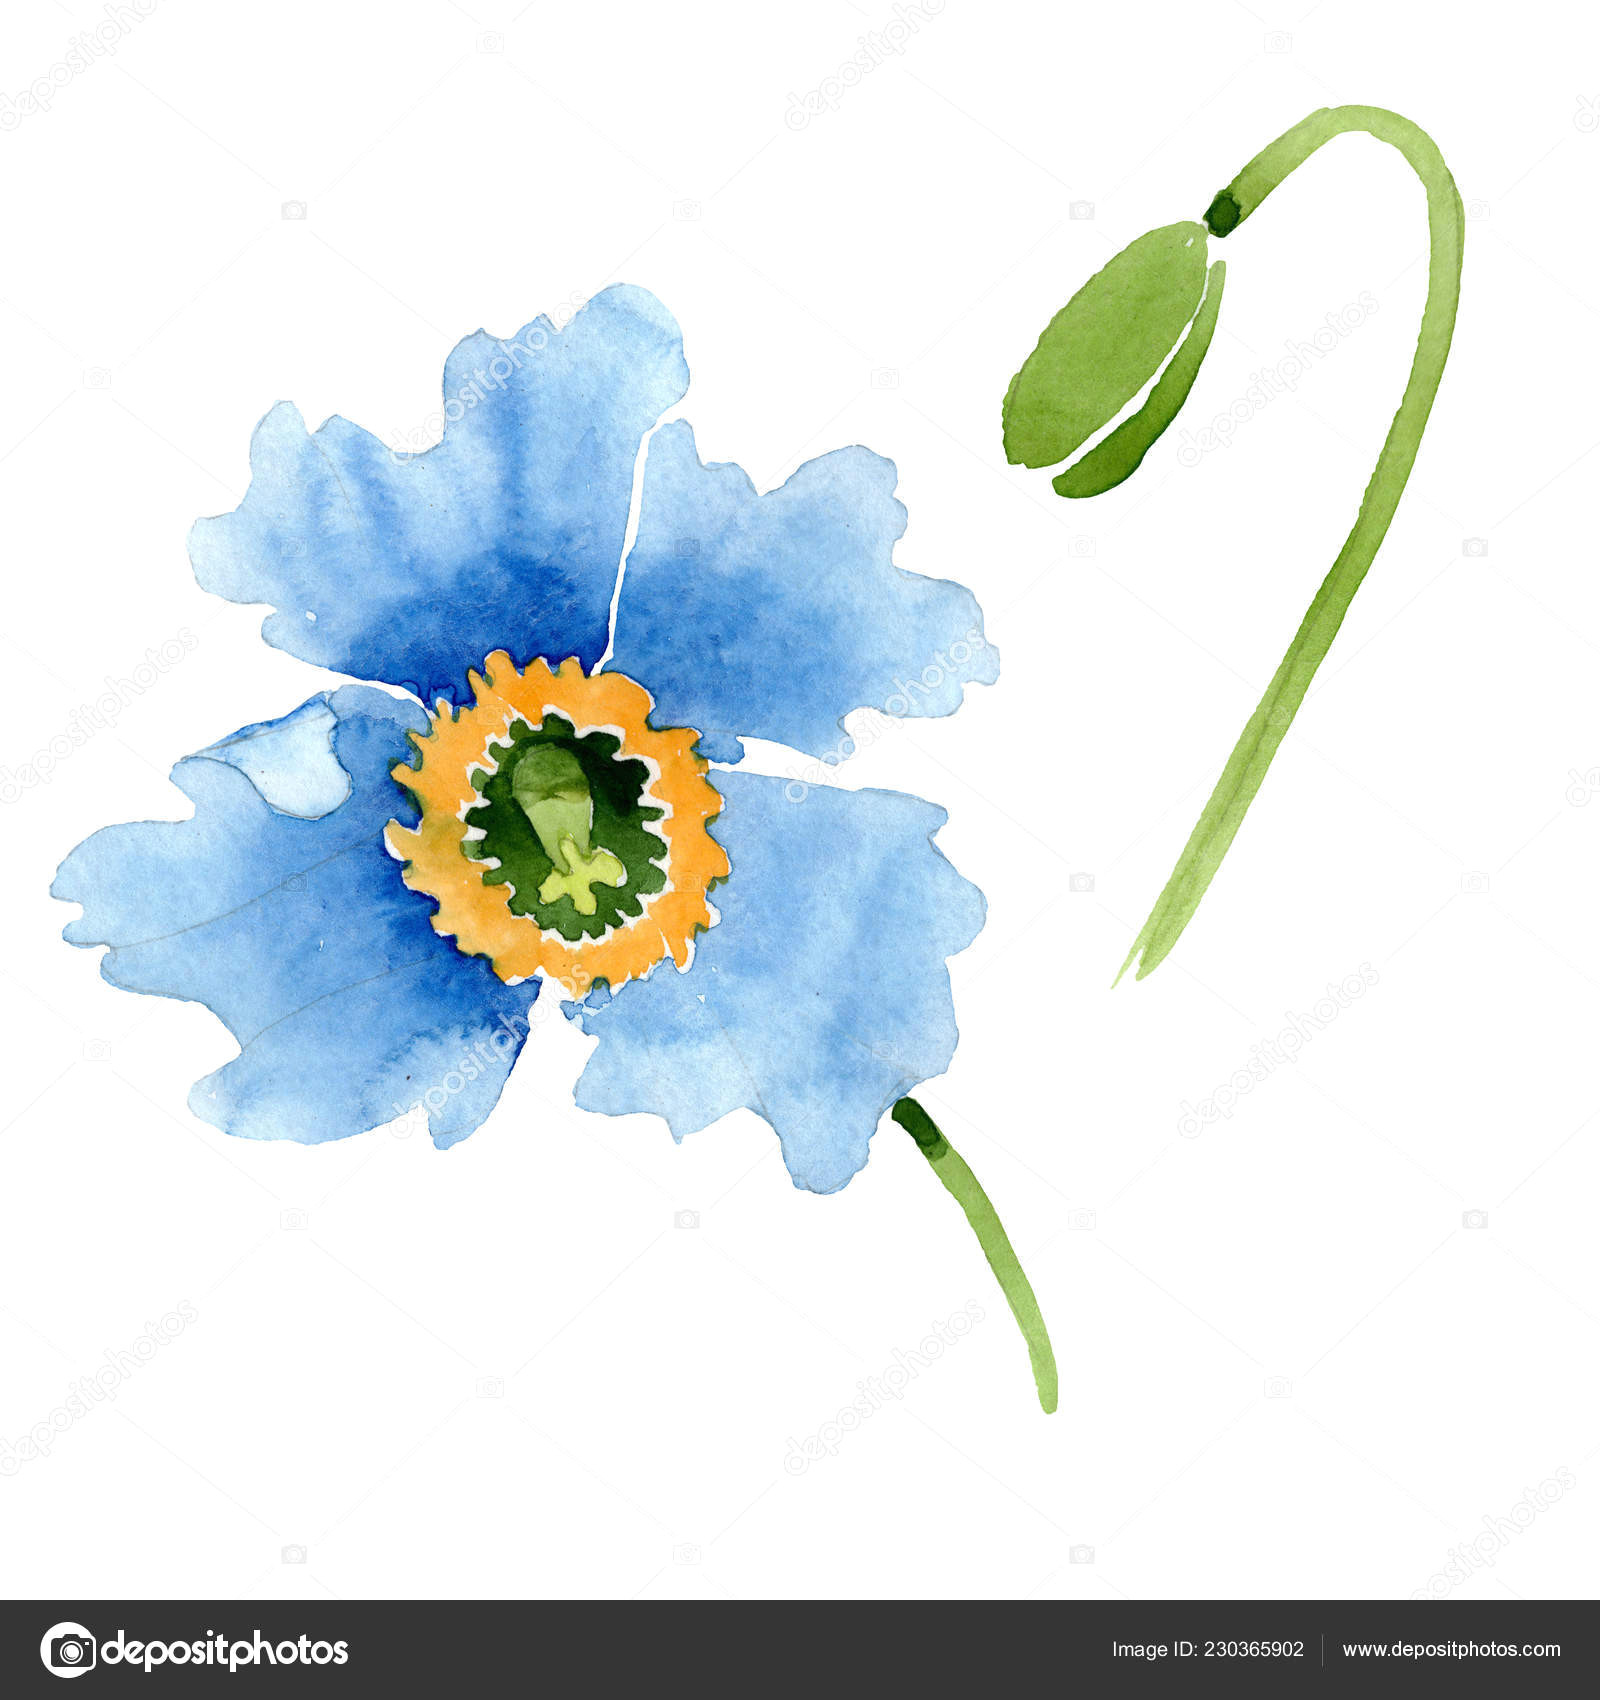 beautiful blue poppy flower and bud isolated on white watercolor background illustration watercolour drawing fashion aquarelle isolated poppy illustration